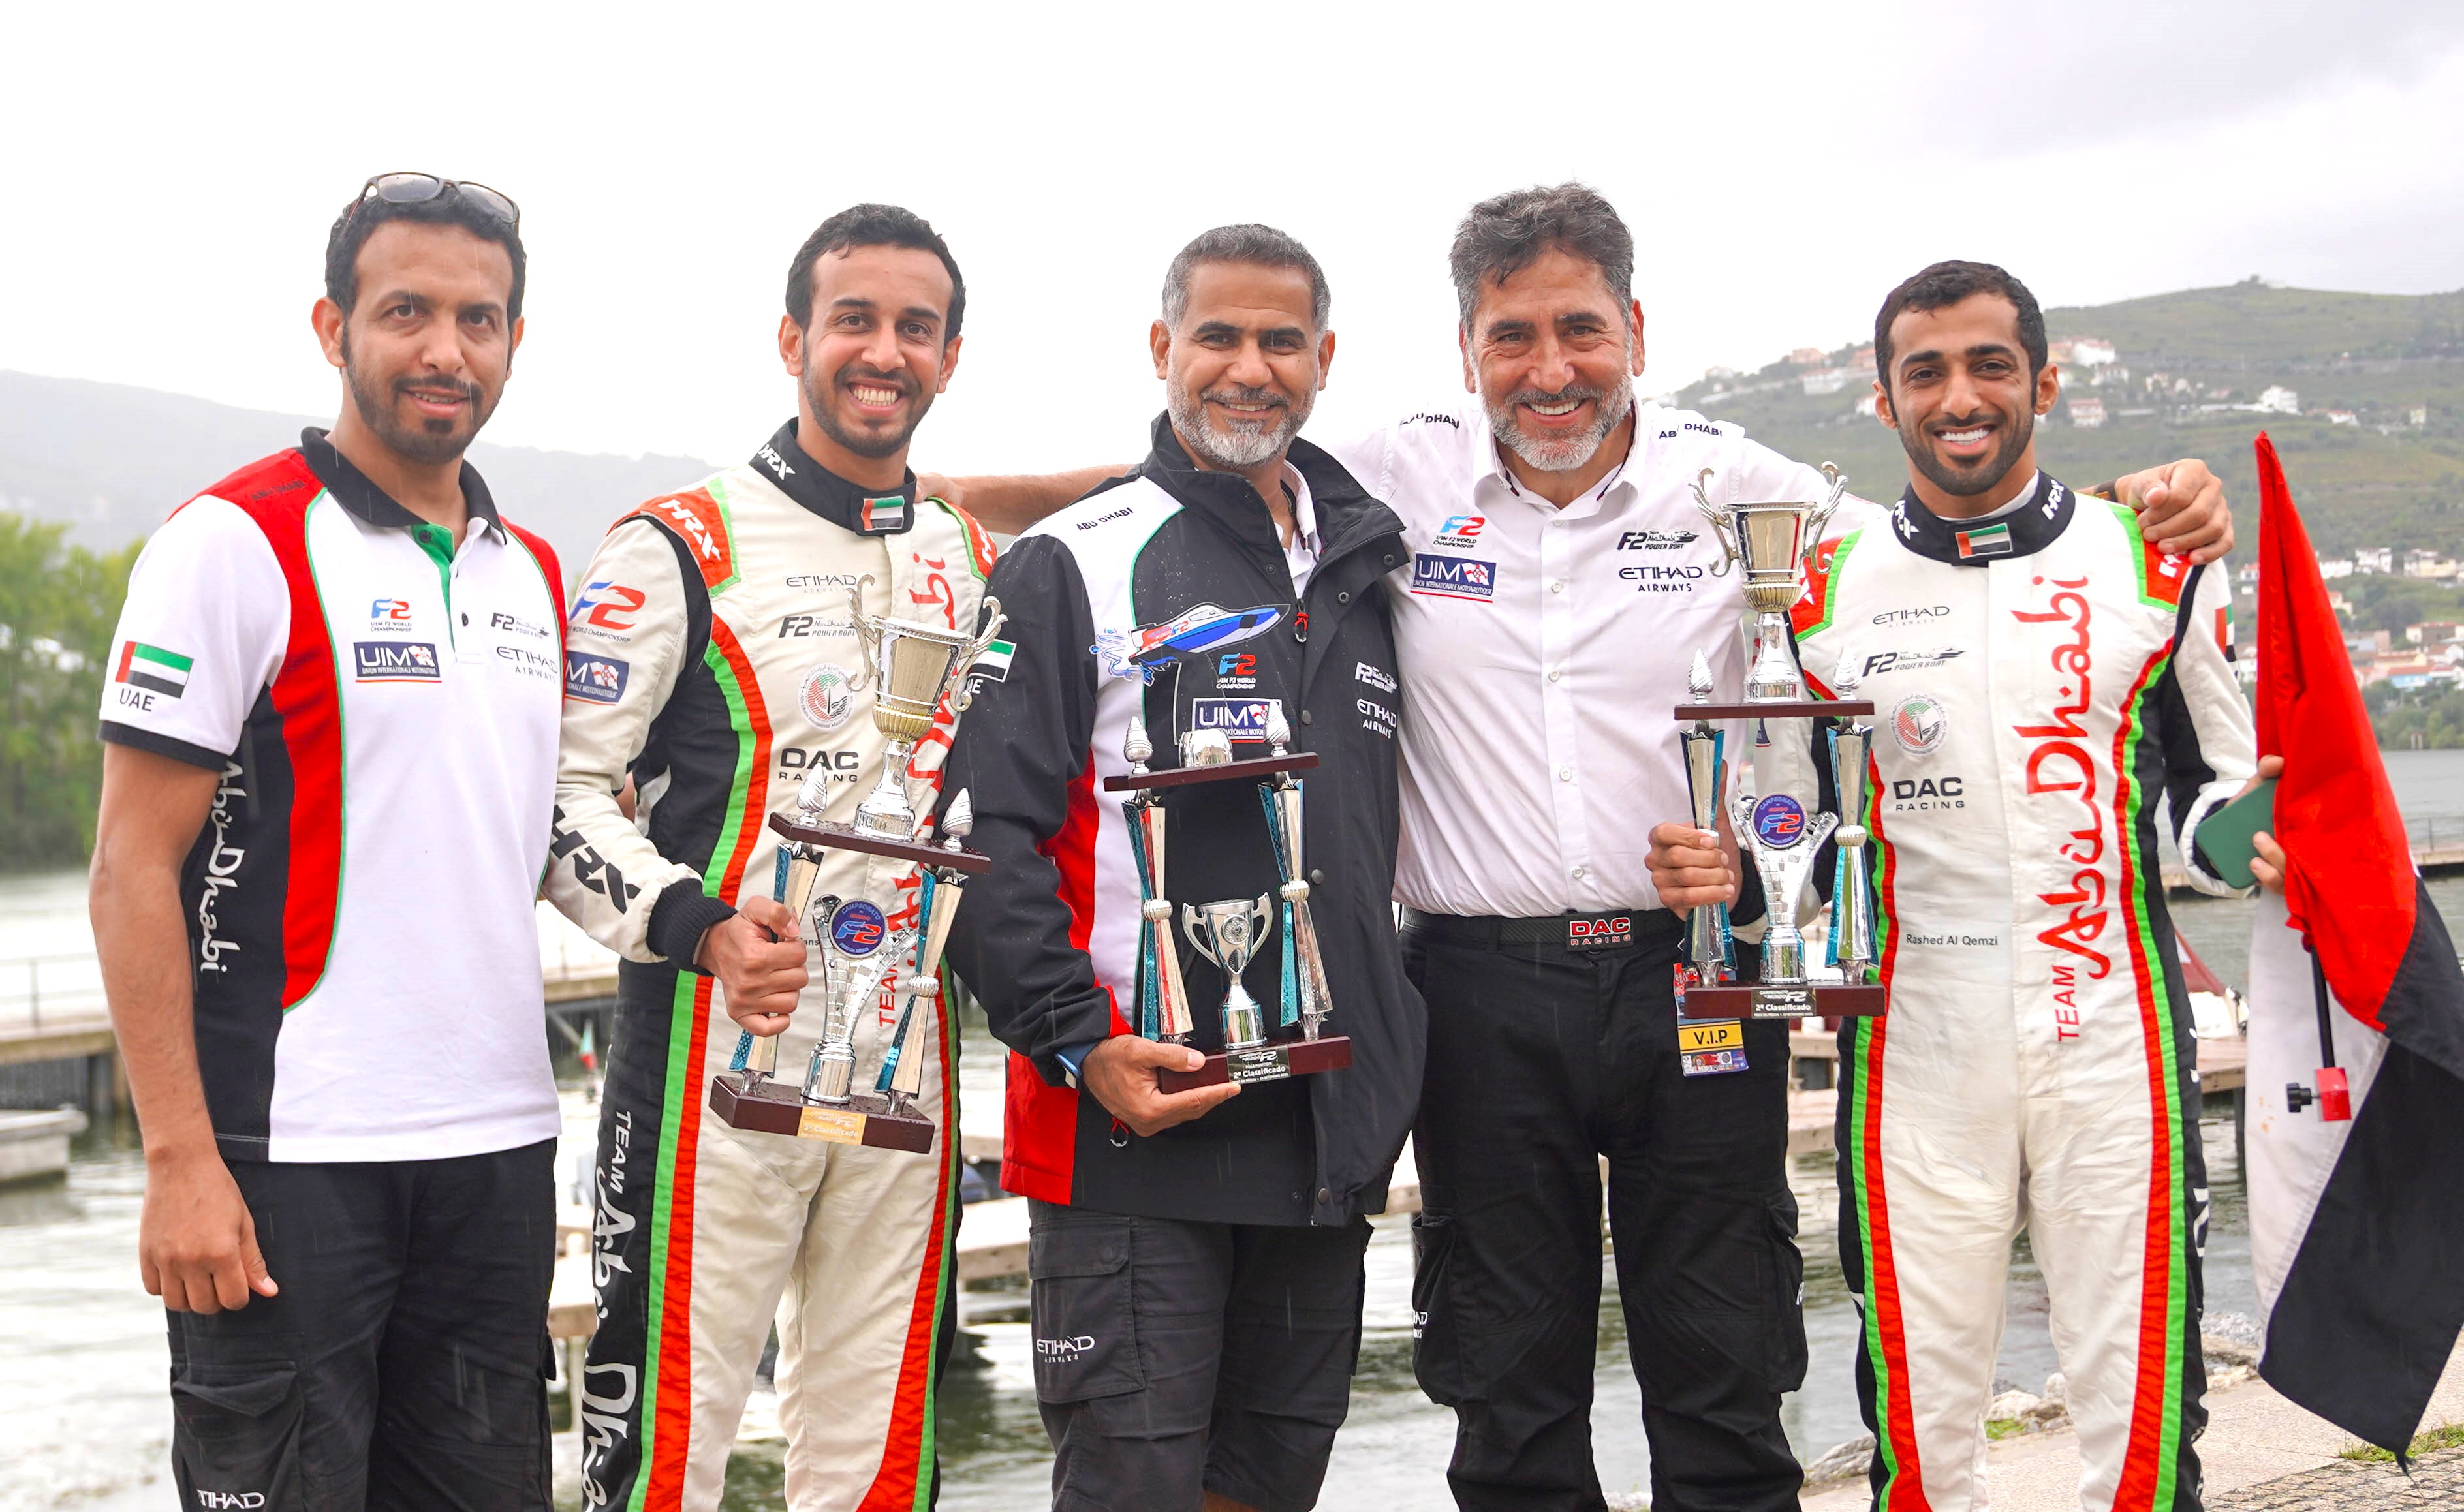 Rashed aims for grand finale in Portugal